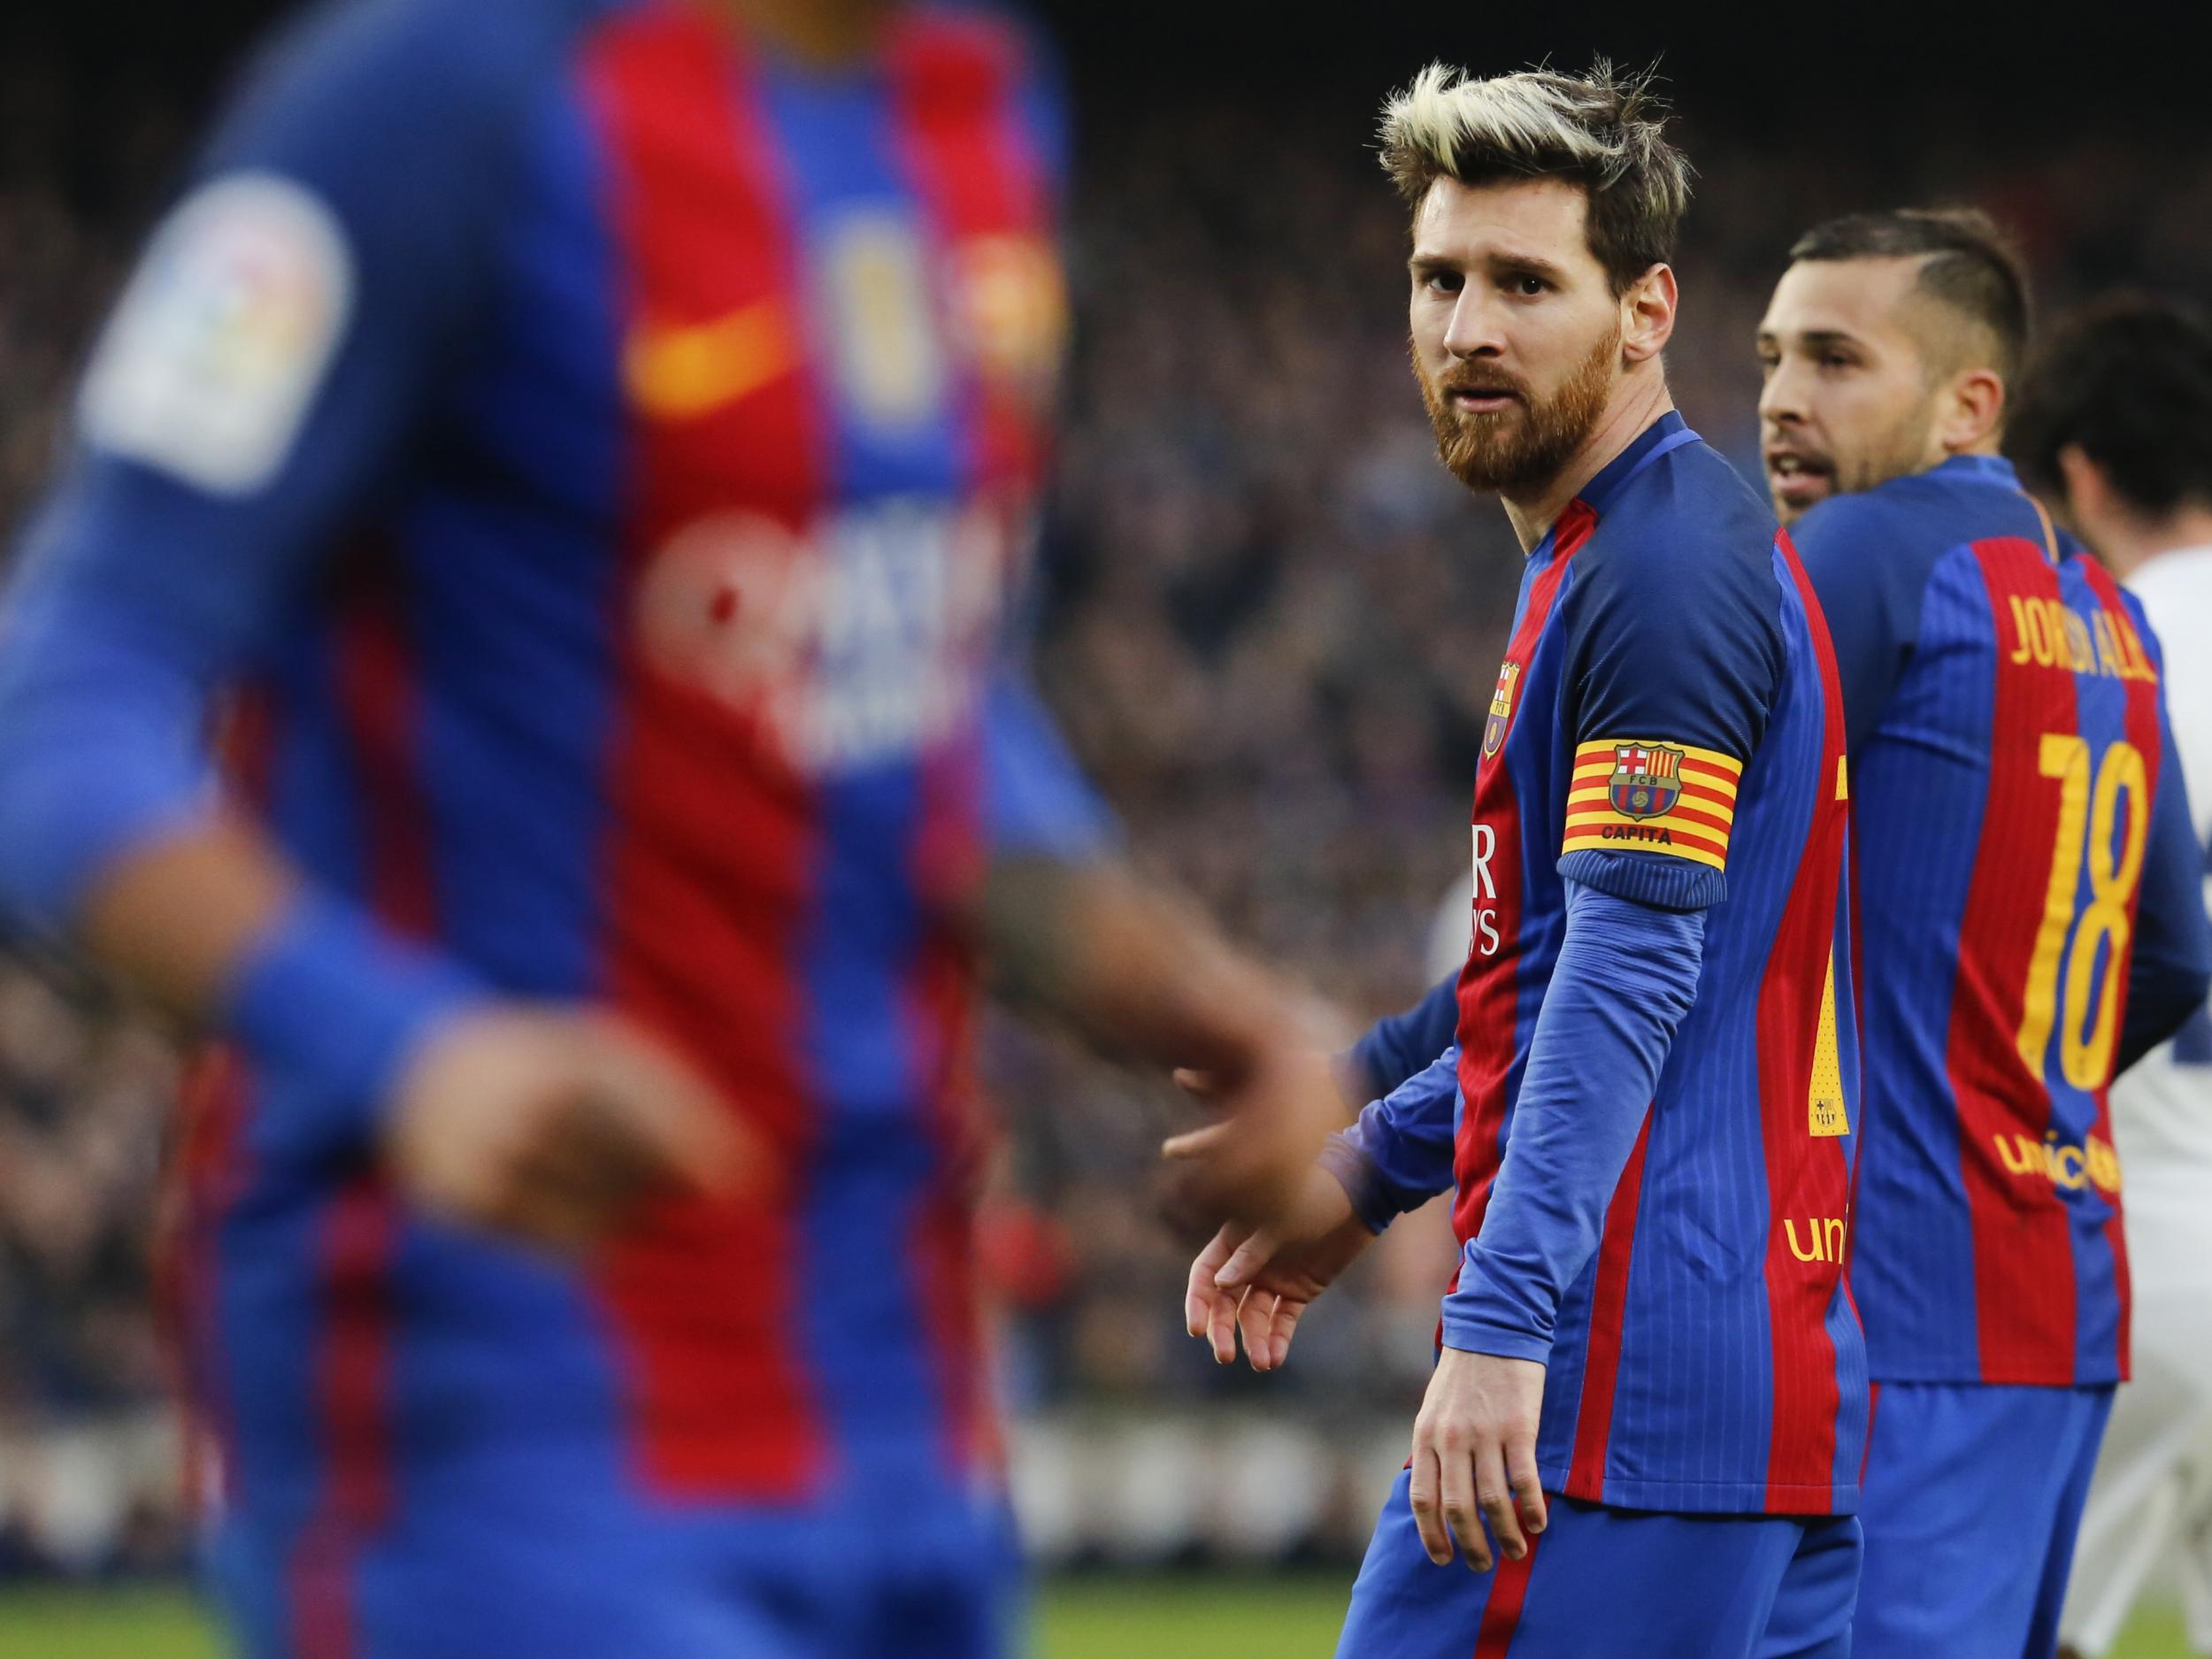 There are no guarantees Messi's Barcelona will reach the next round